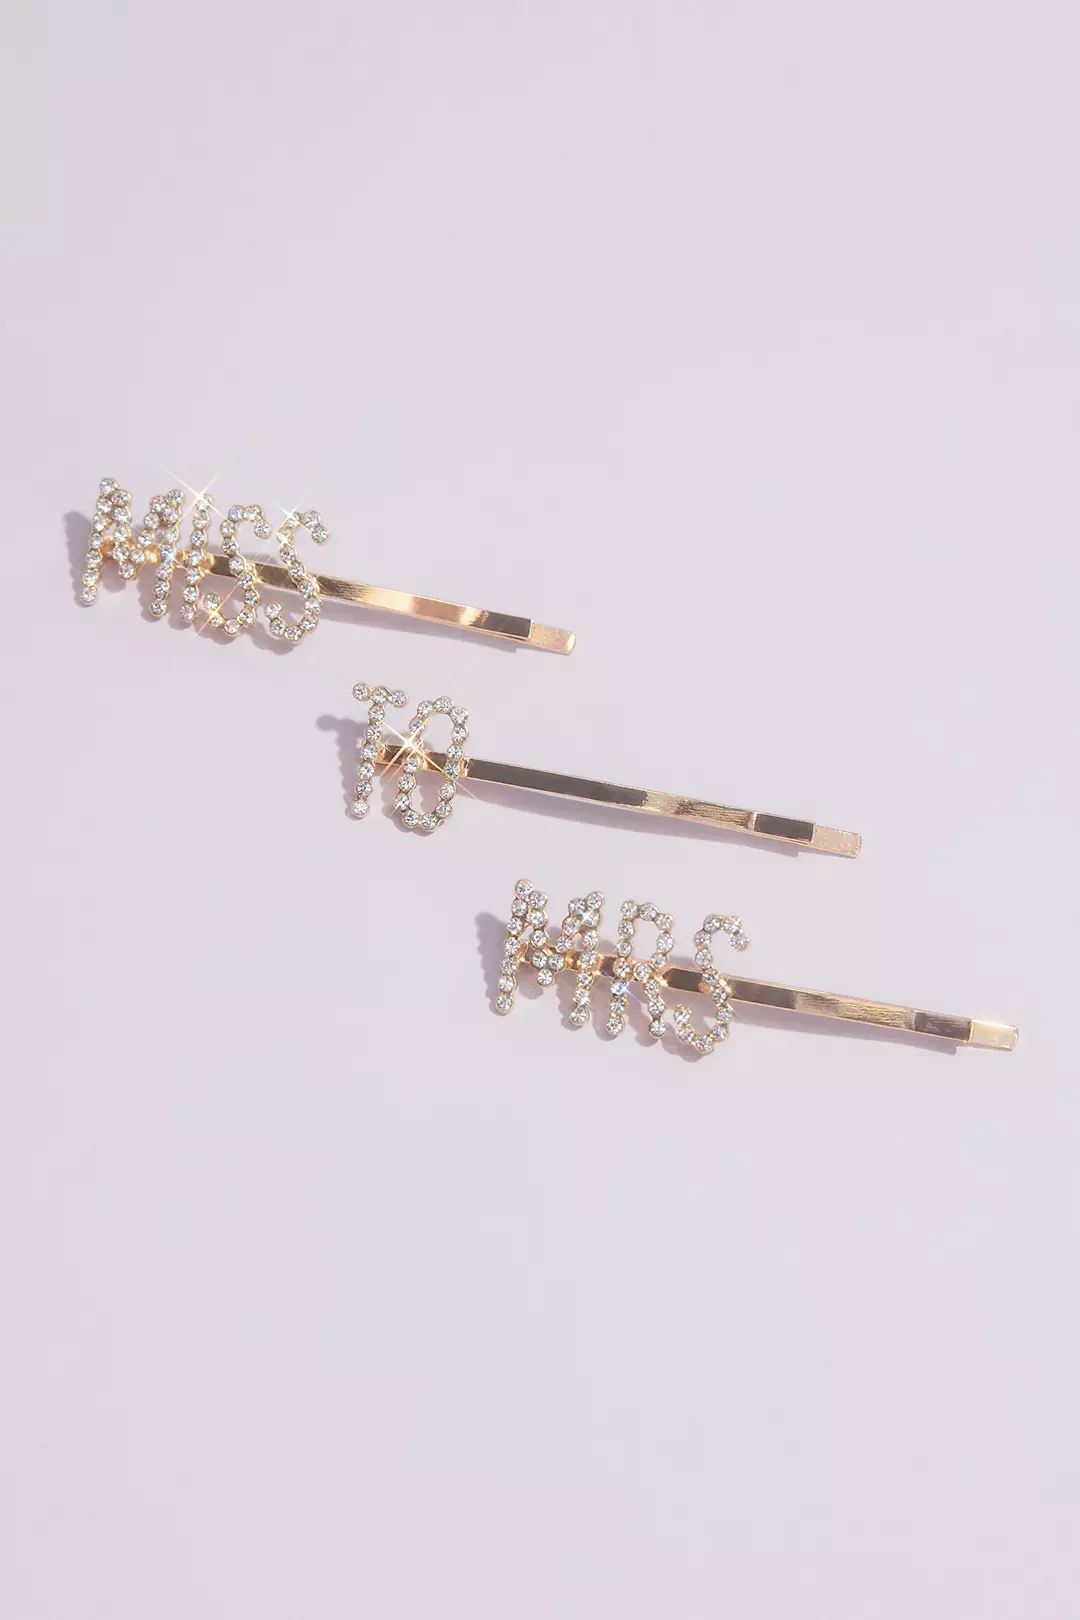 Miss to Mrs Hairpins Image